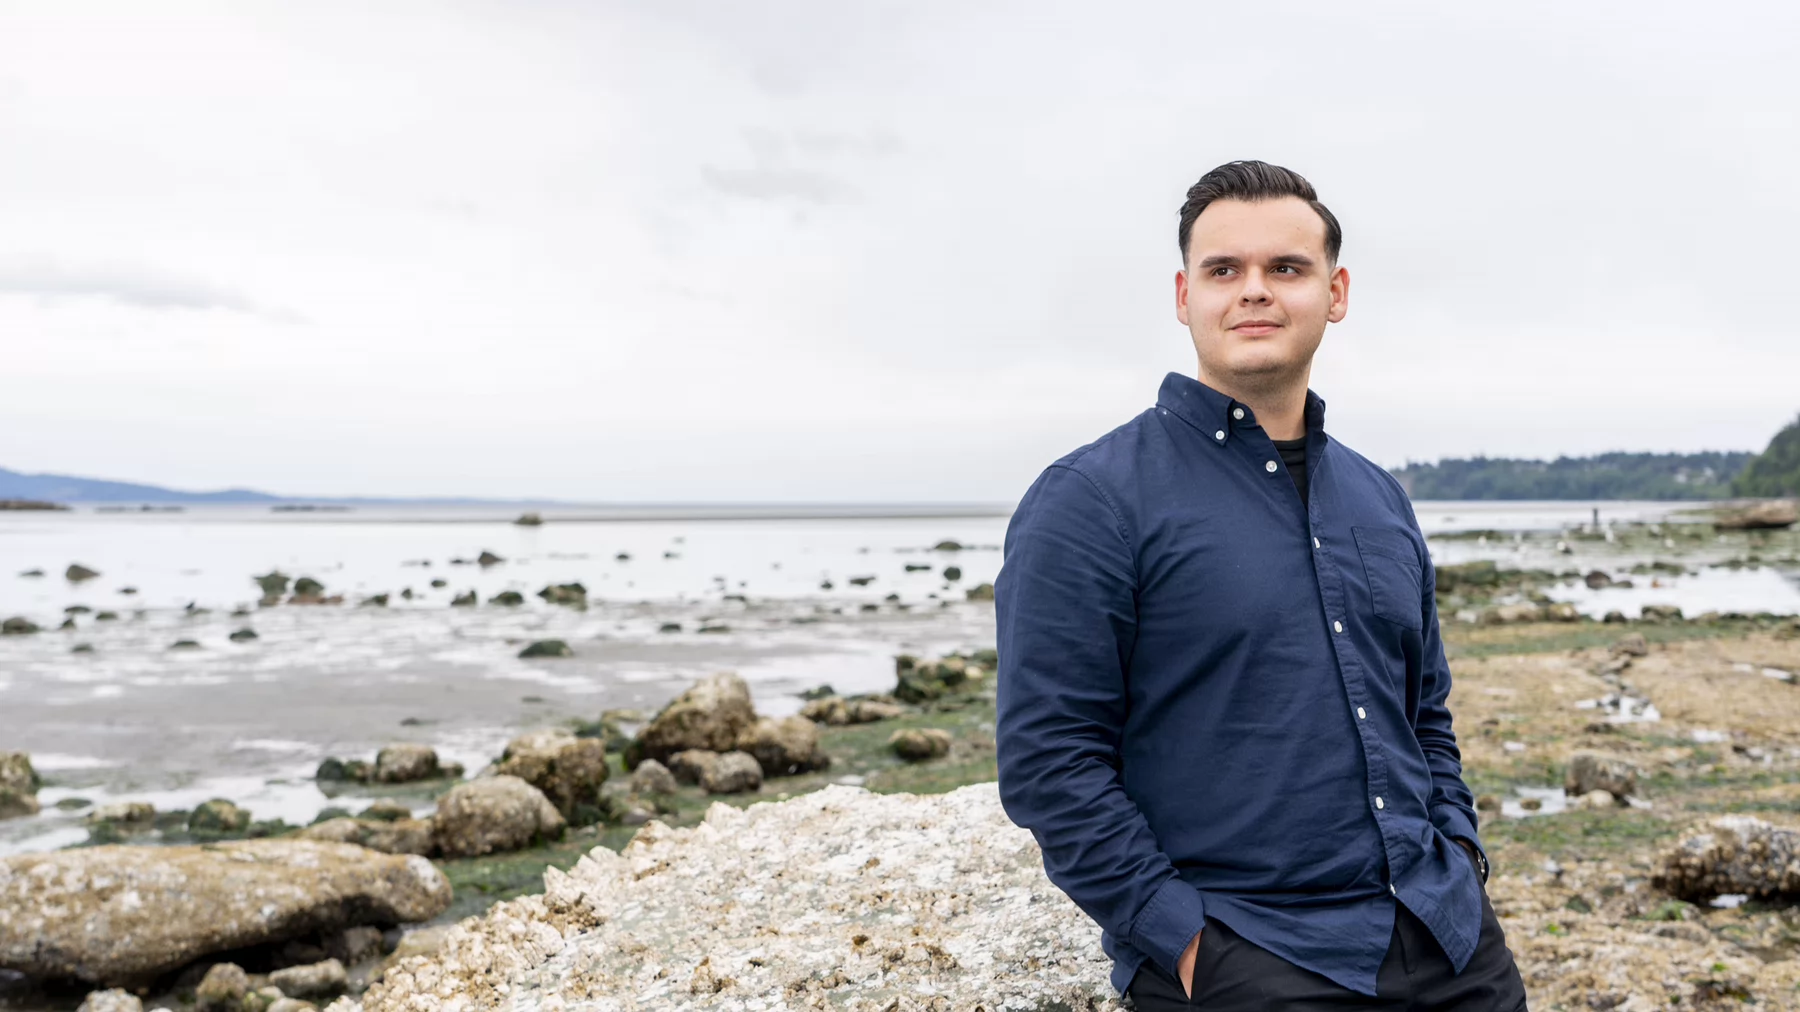 A young Indigenous man wearing a blue shirt stands on the shoreline of Cordova Bay. The tide is out, leaving kelp and barnacle-covered rocks visible in the background.